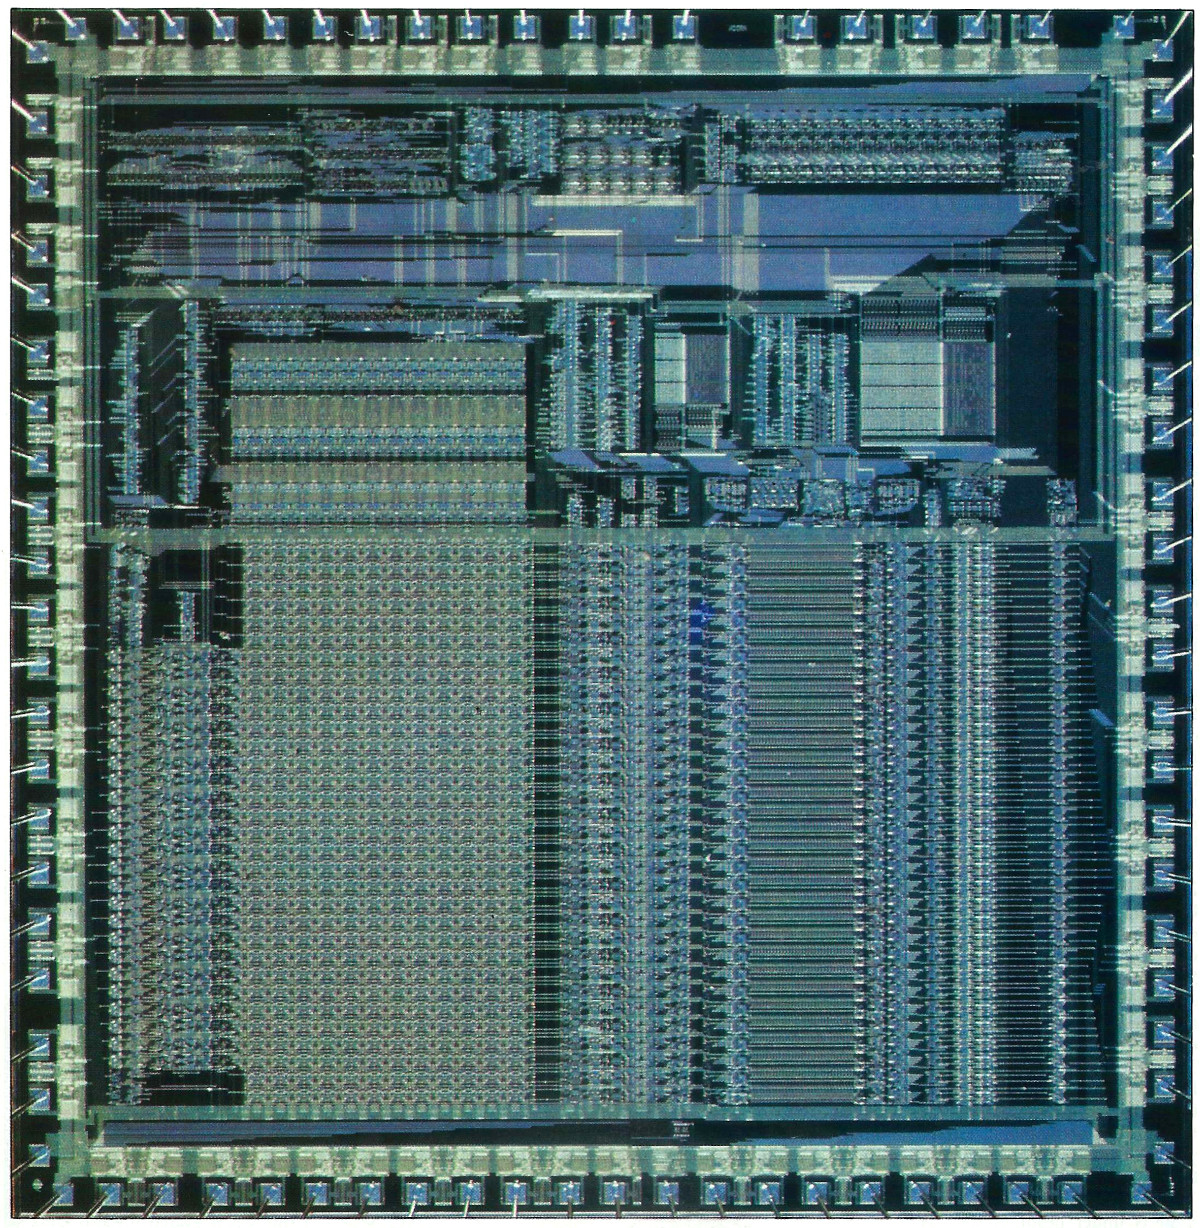 Acorn's original RISC CPU, containing 25,000 logic gates. The larger area to the bottom left is the chip's registers. The layout was optimised around this as most activity on a RISC chip is based on register transfers. From Practical Computing, October 1986